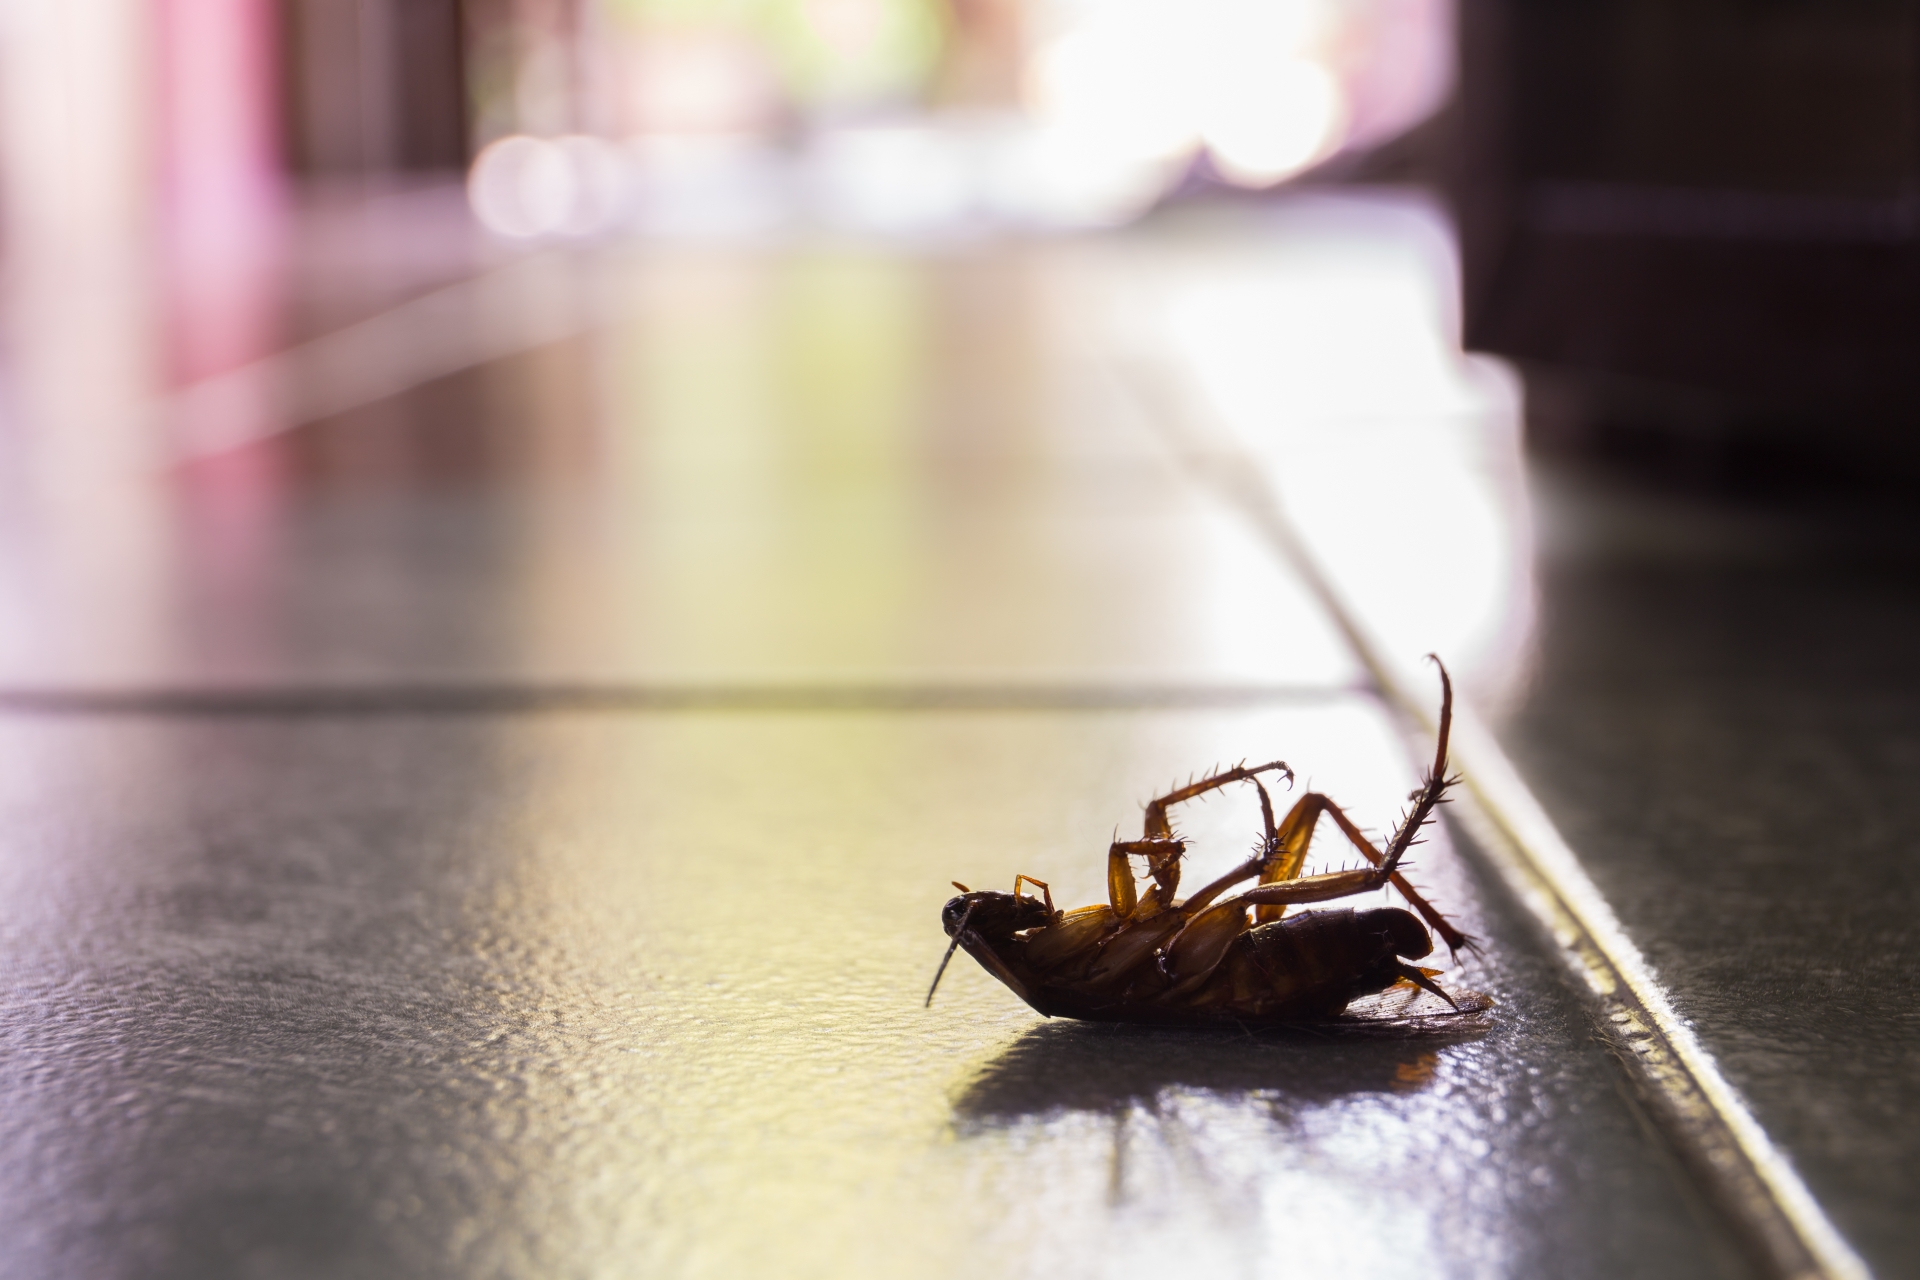 Cockroach Control, Pest Control in Chelsea, SW3. Call Now 020 8166 9746